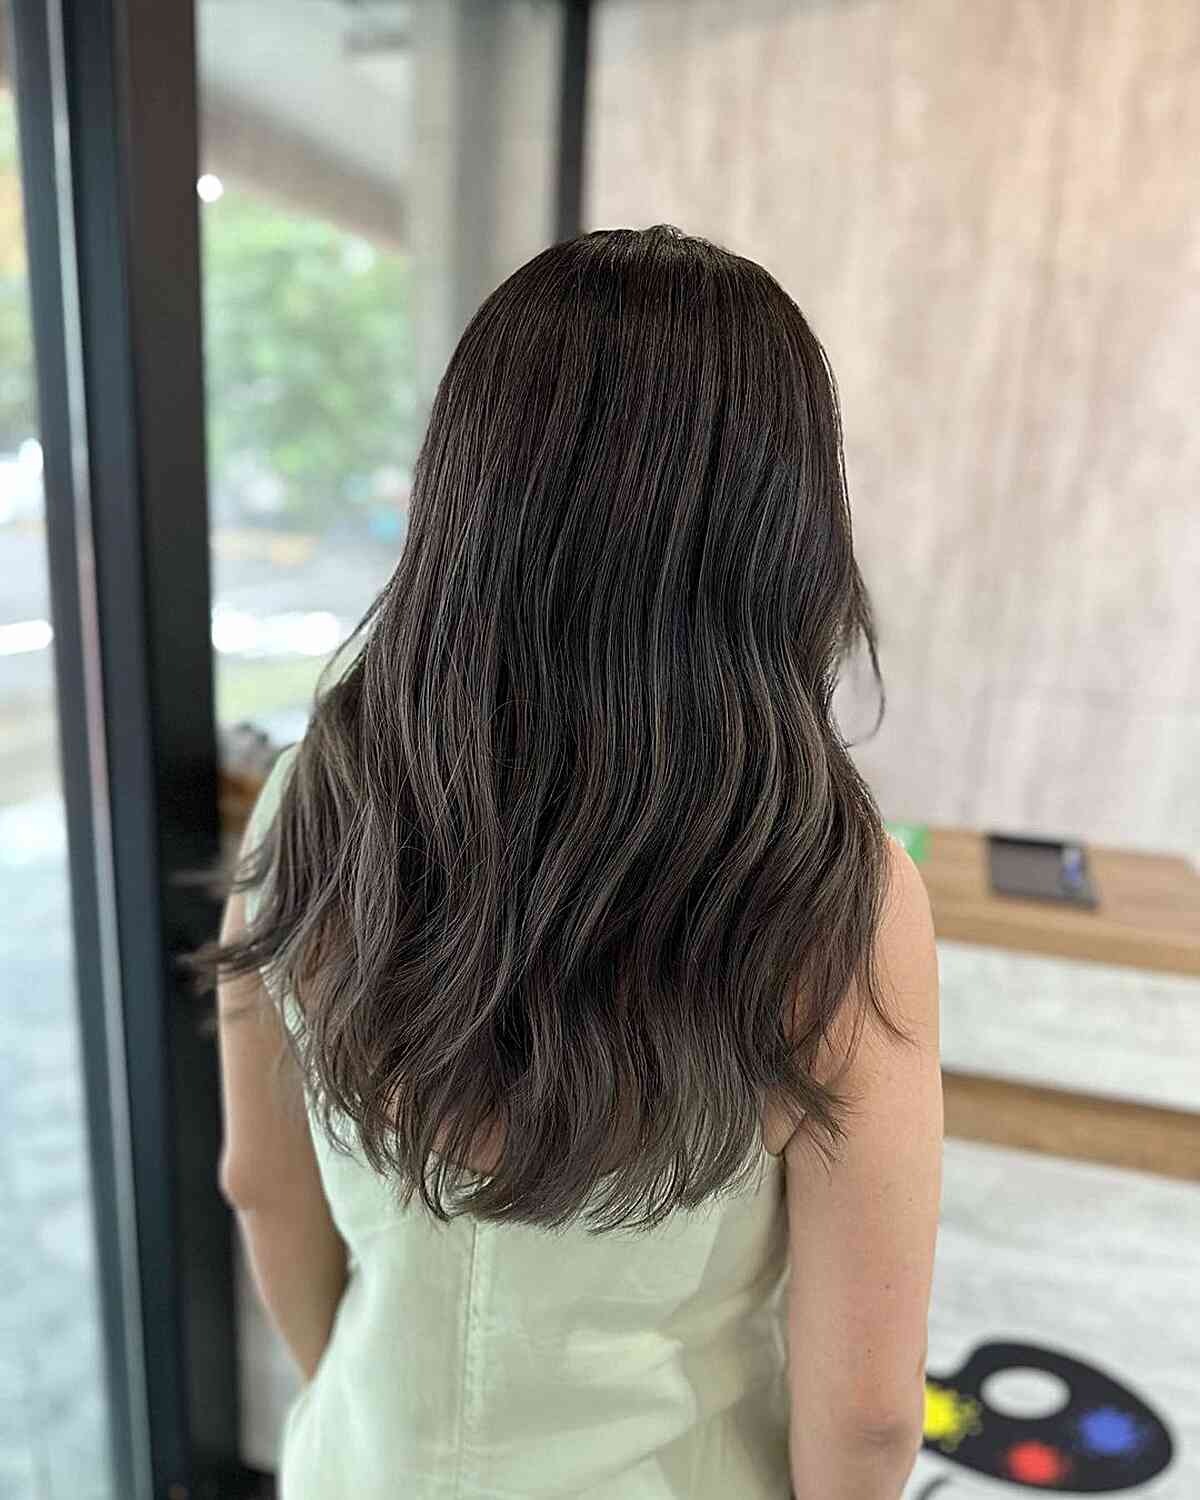 Airtouch Balayage for Mid-Back Ash Brown Hair